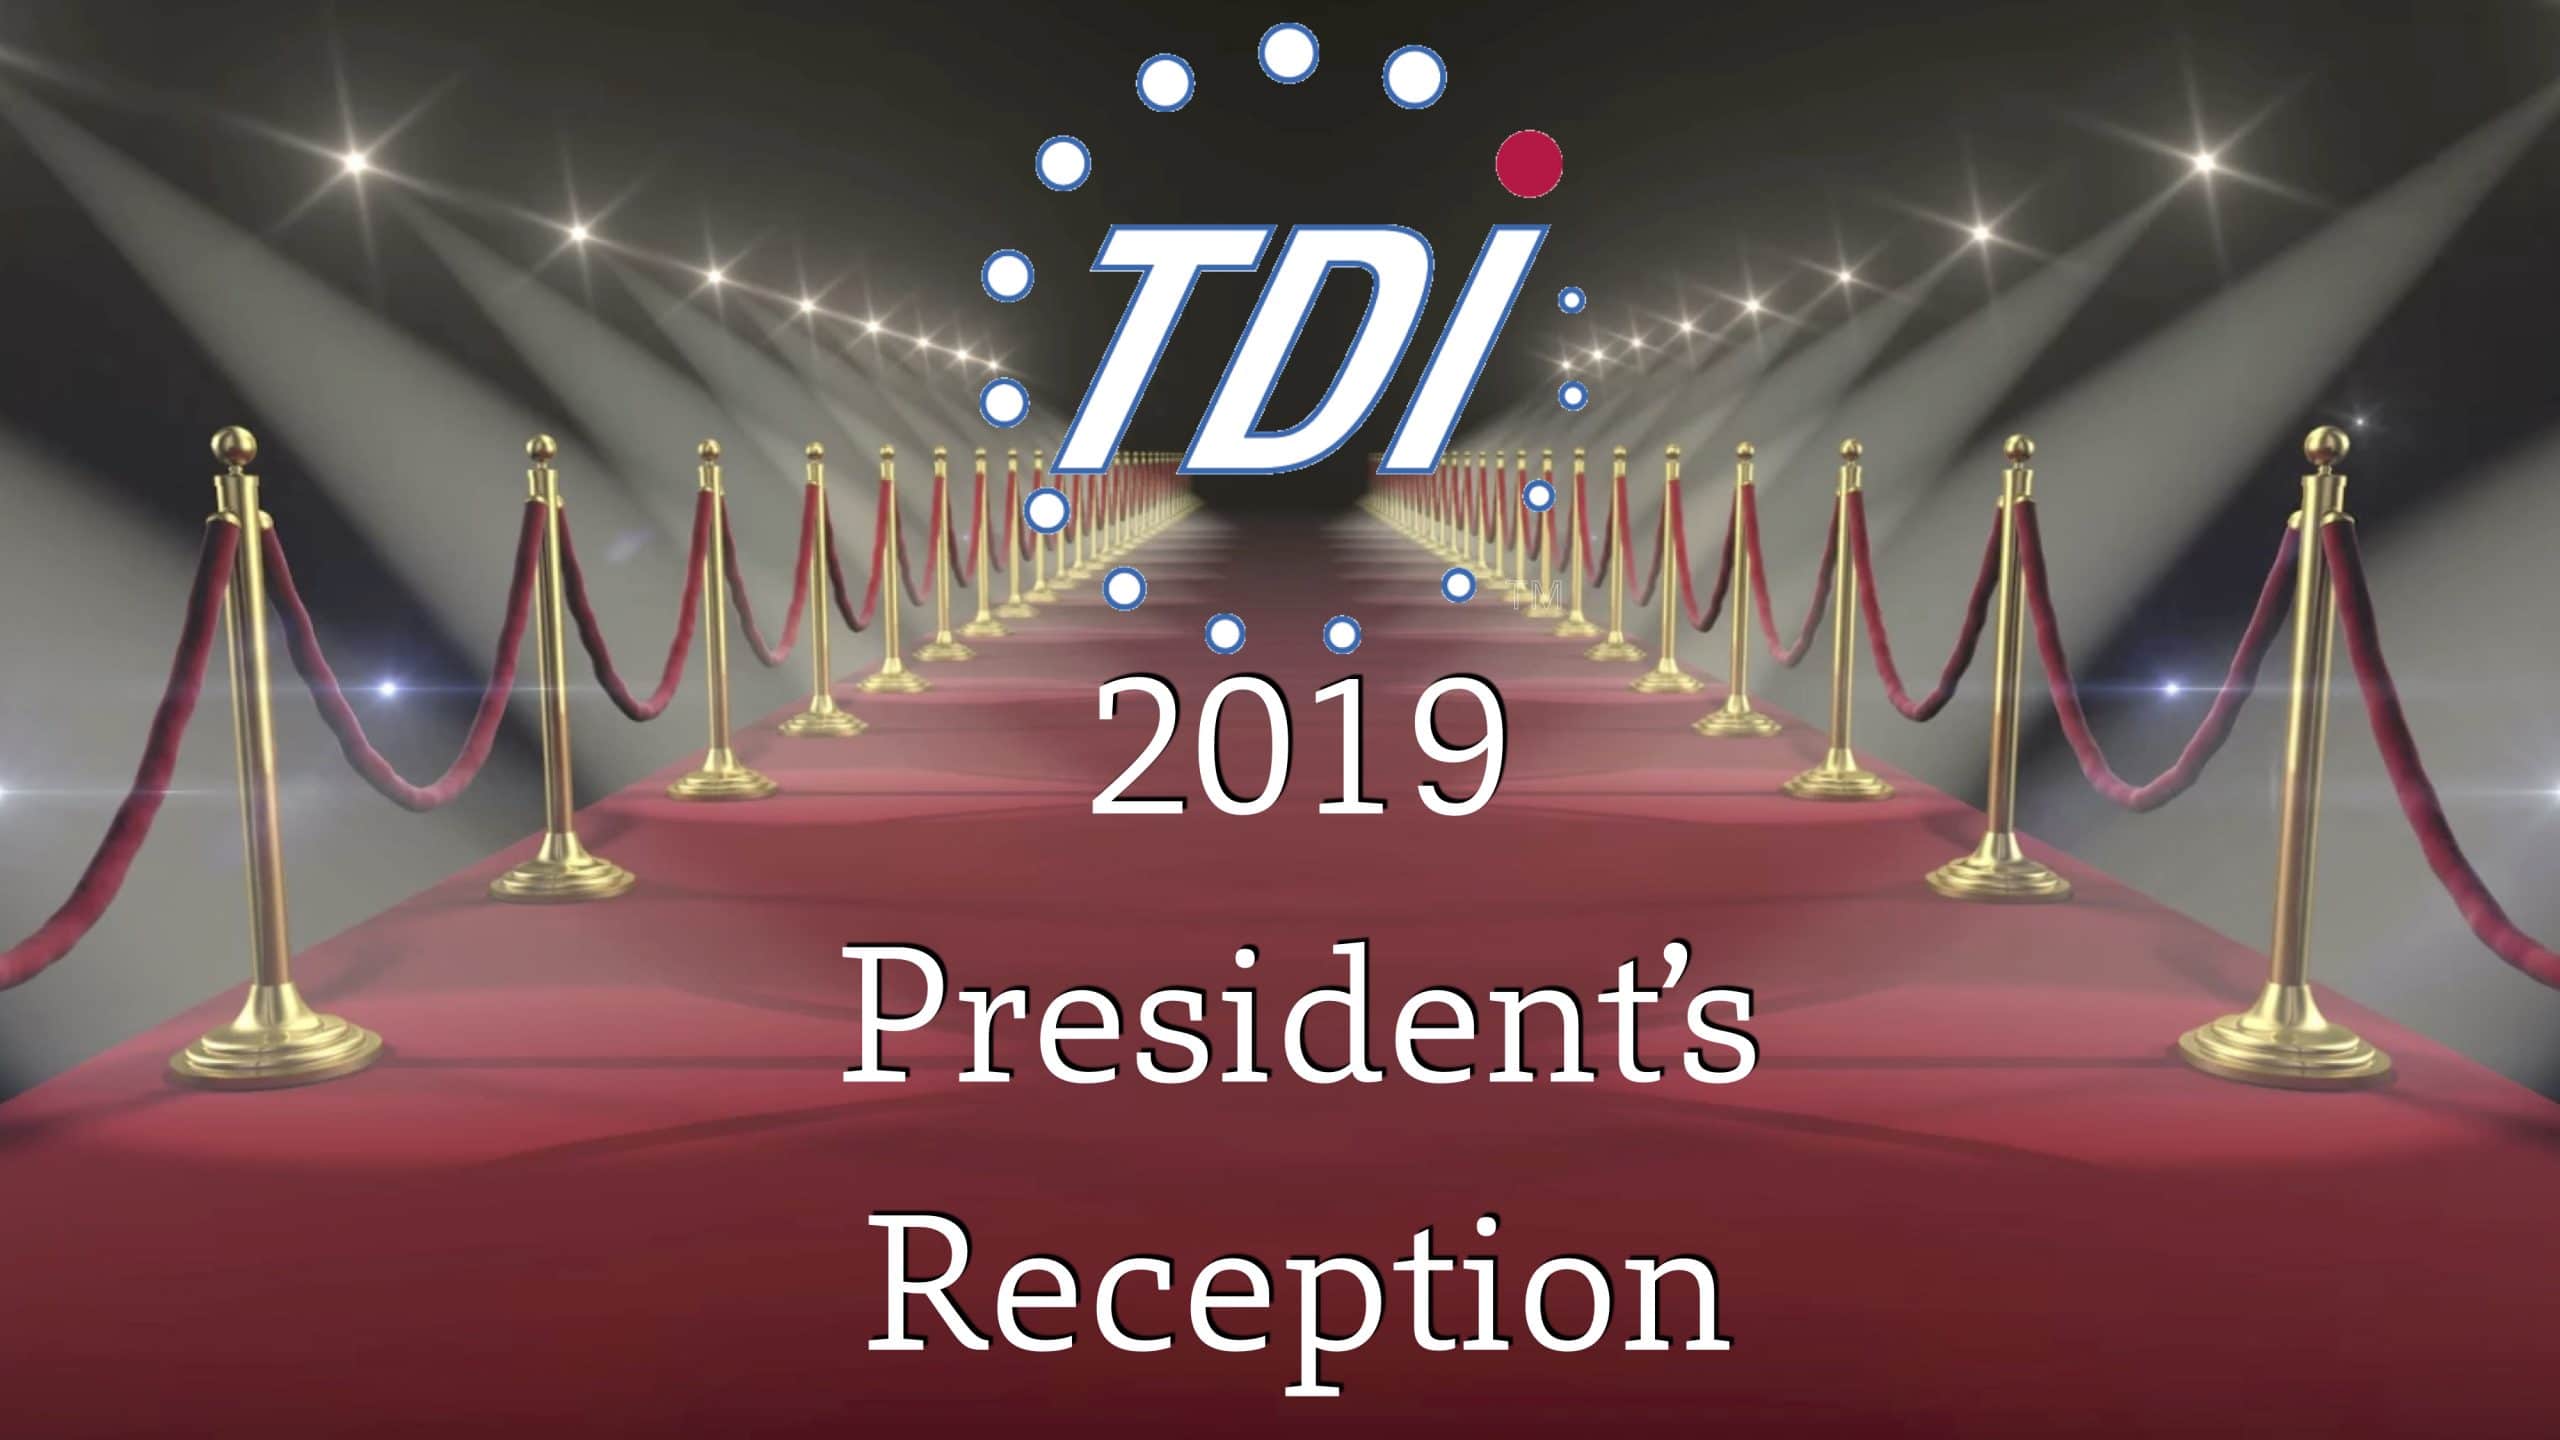 Red carpet with lights. Text reads: (TDI logo) 2019 President's Reception